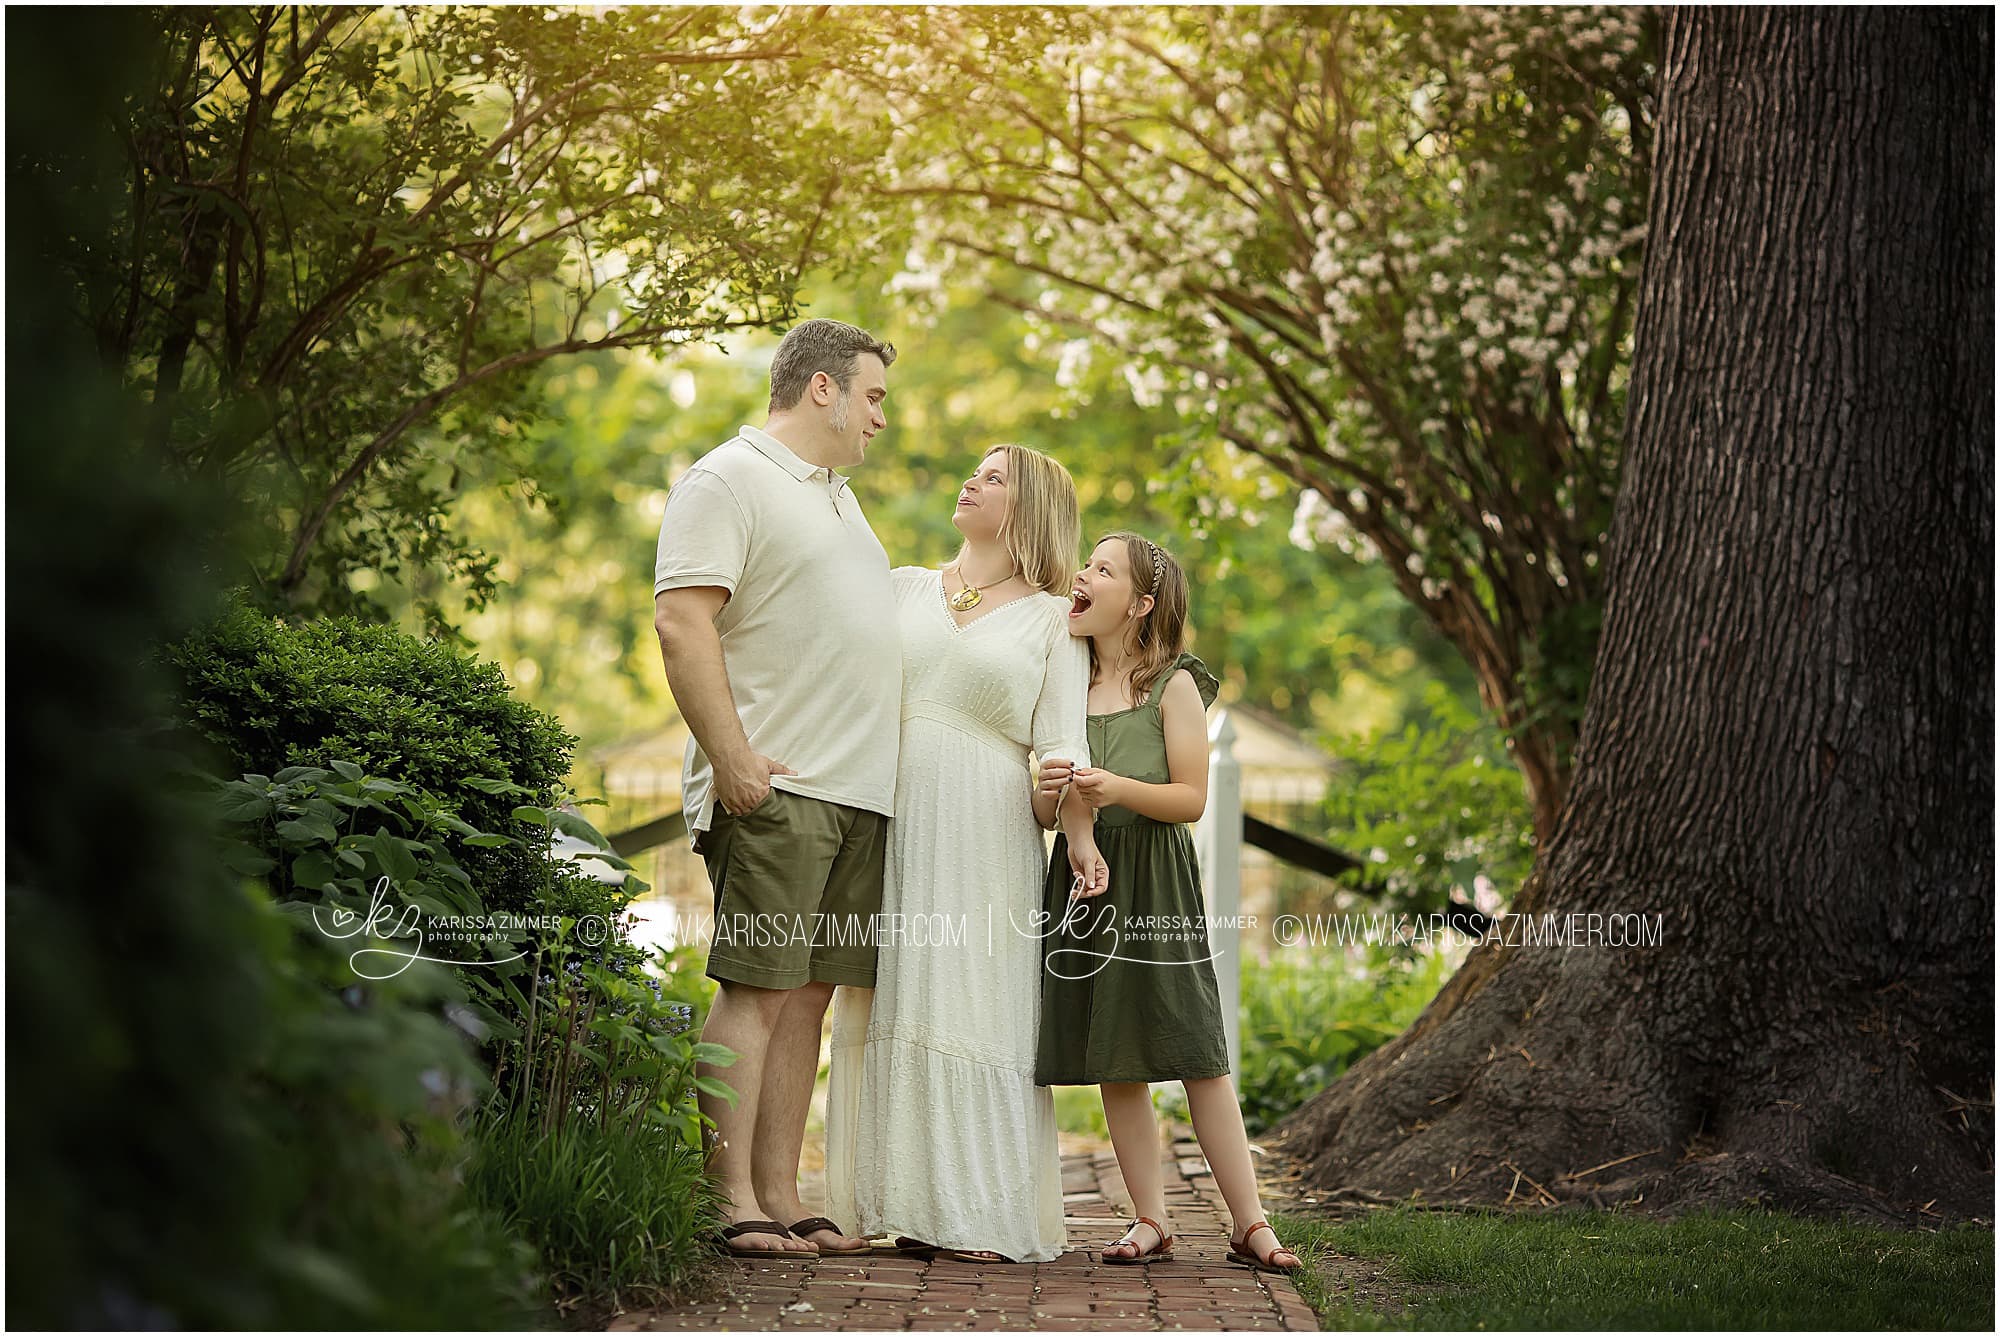 Family Pictures Near 17050 by Karissa Zimmer Photography